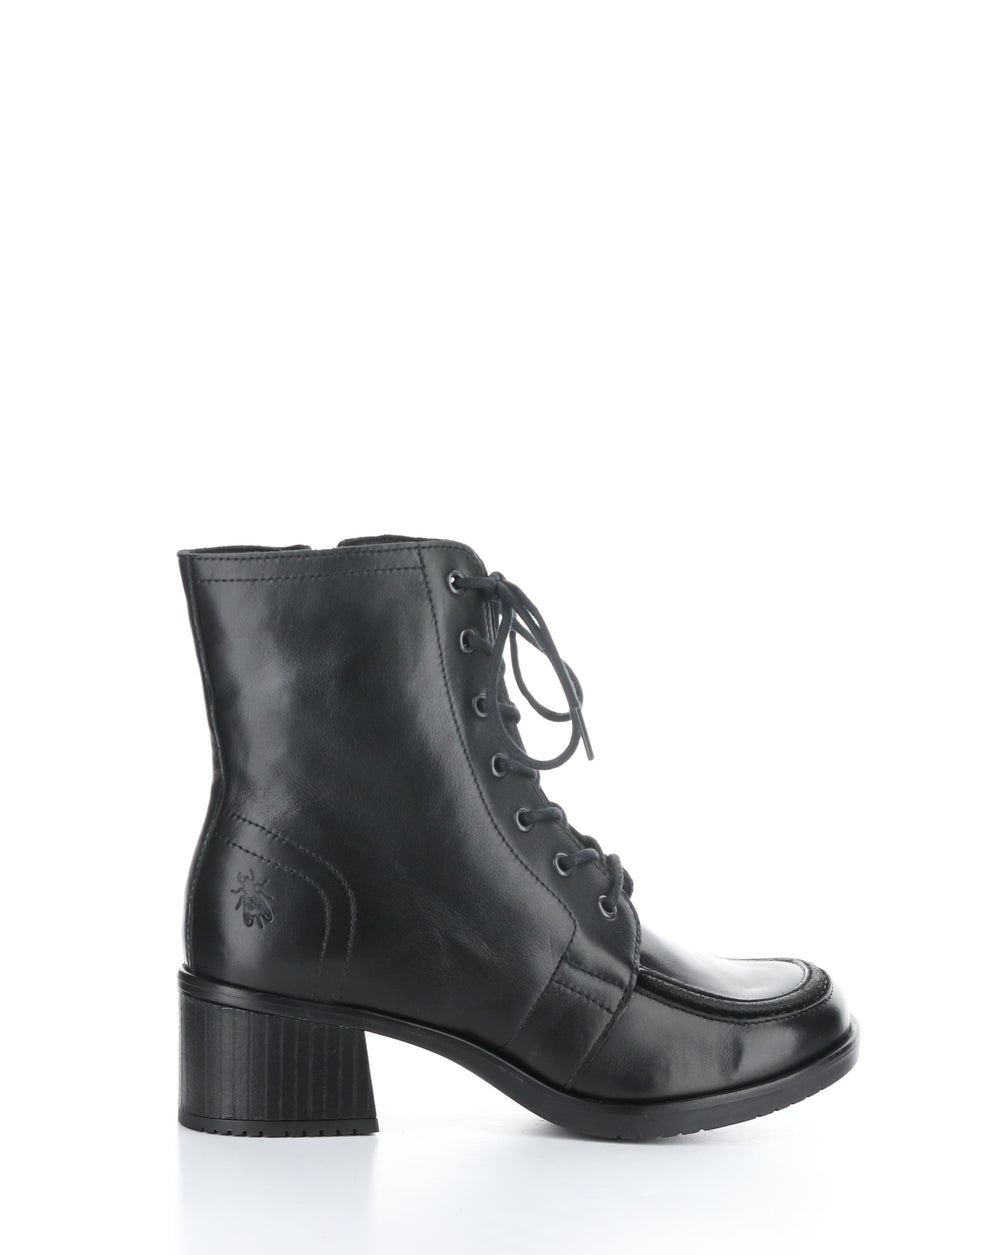 KASS017FLY 000 BLACK Round Toe Boots